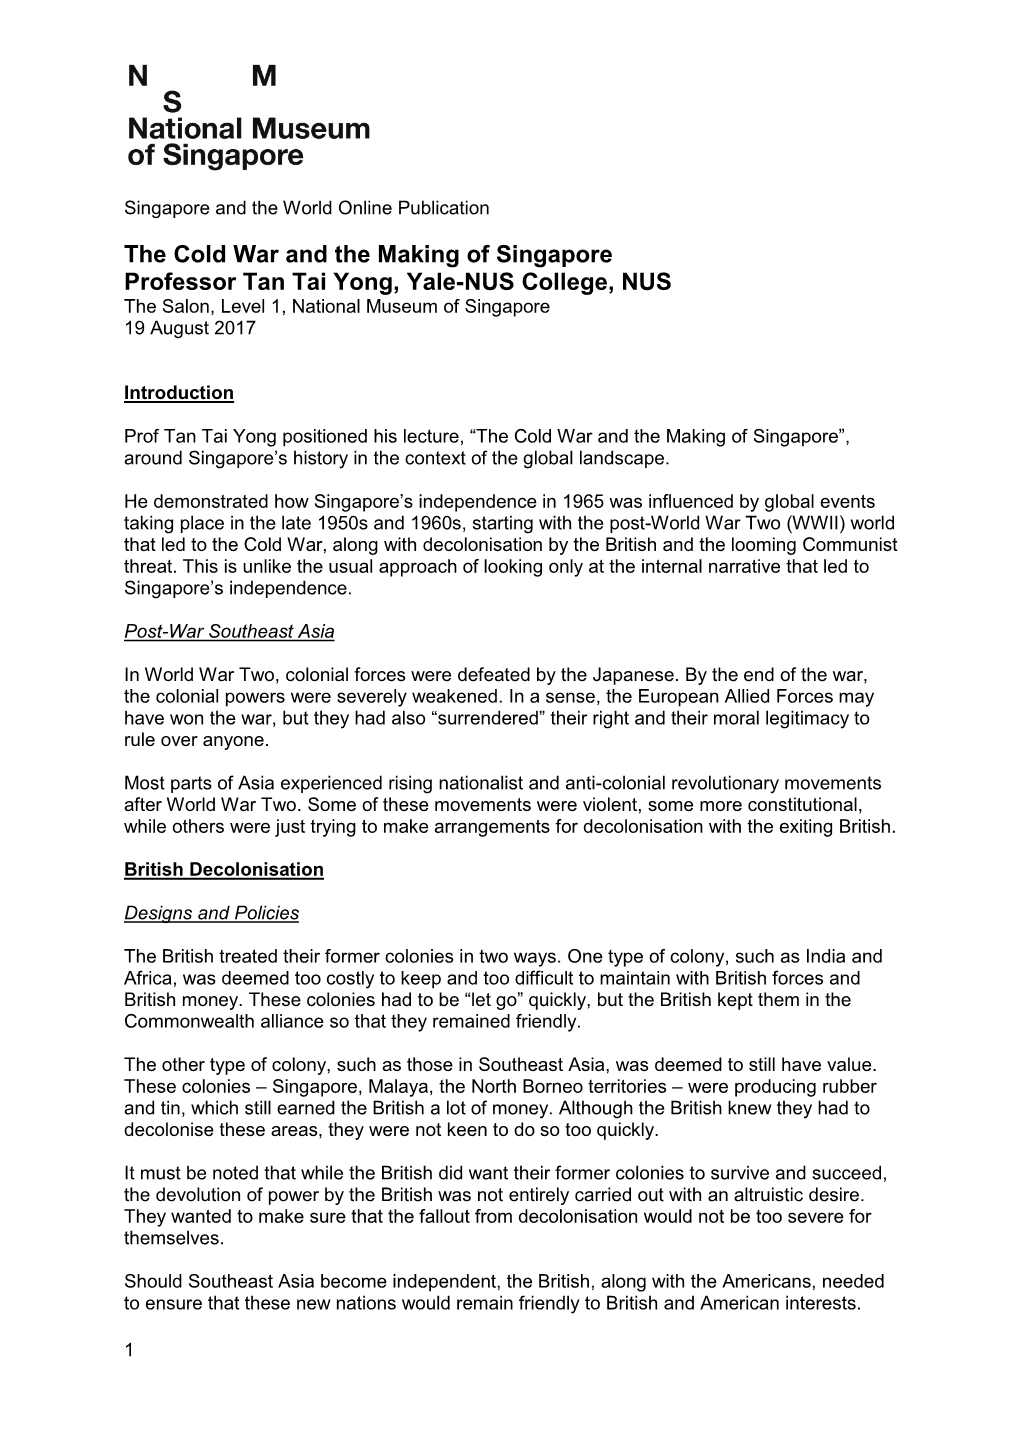 The Cold War and the Making of Singapore Professor Tan Tai Yong, Yale-NUS College, NUS the Salon, Level 1, National Museum of Singapore 19 August 2017